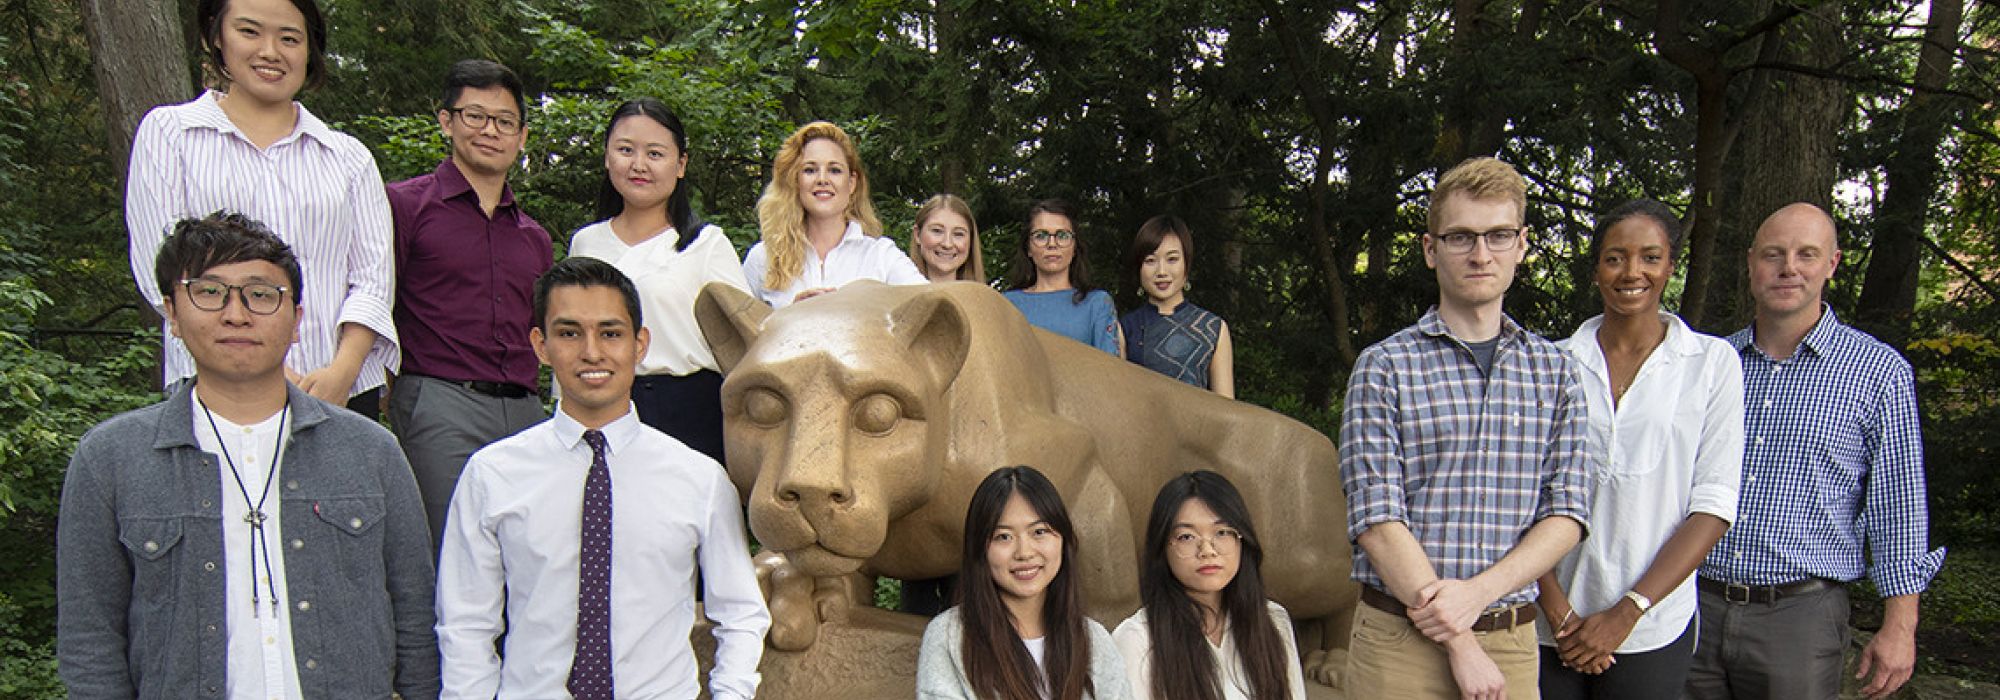 Fourteen graduate students pose in front of the Nittany Lion shrine, a large sculpture of a mountain lion carved out of limestone.